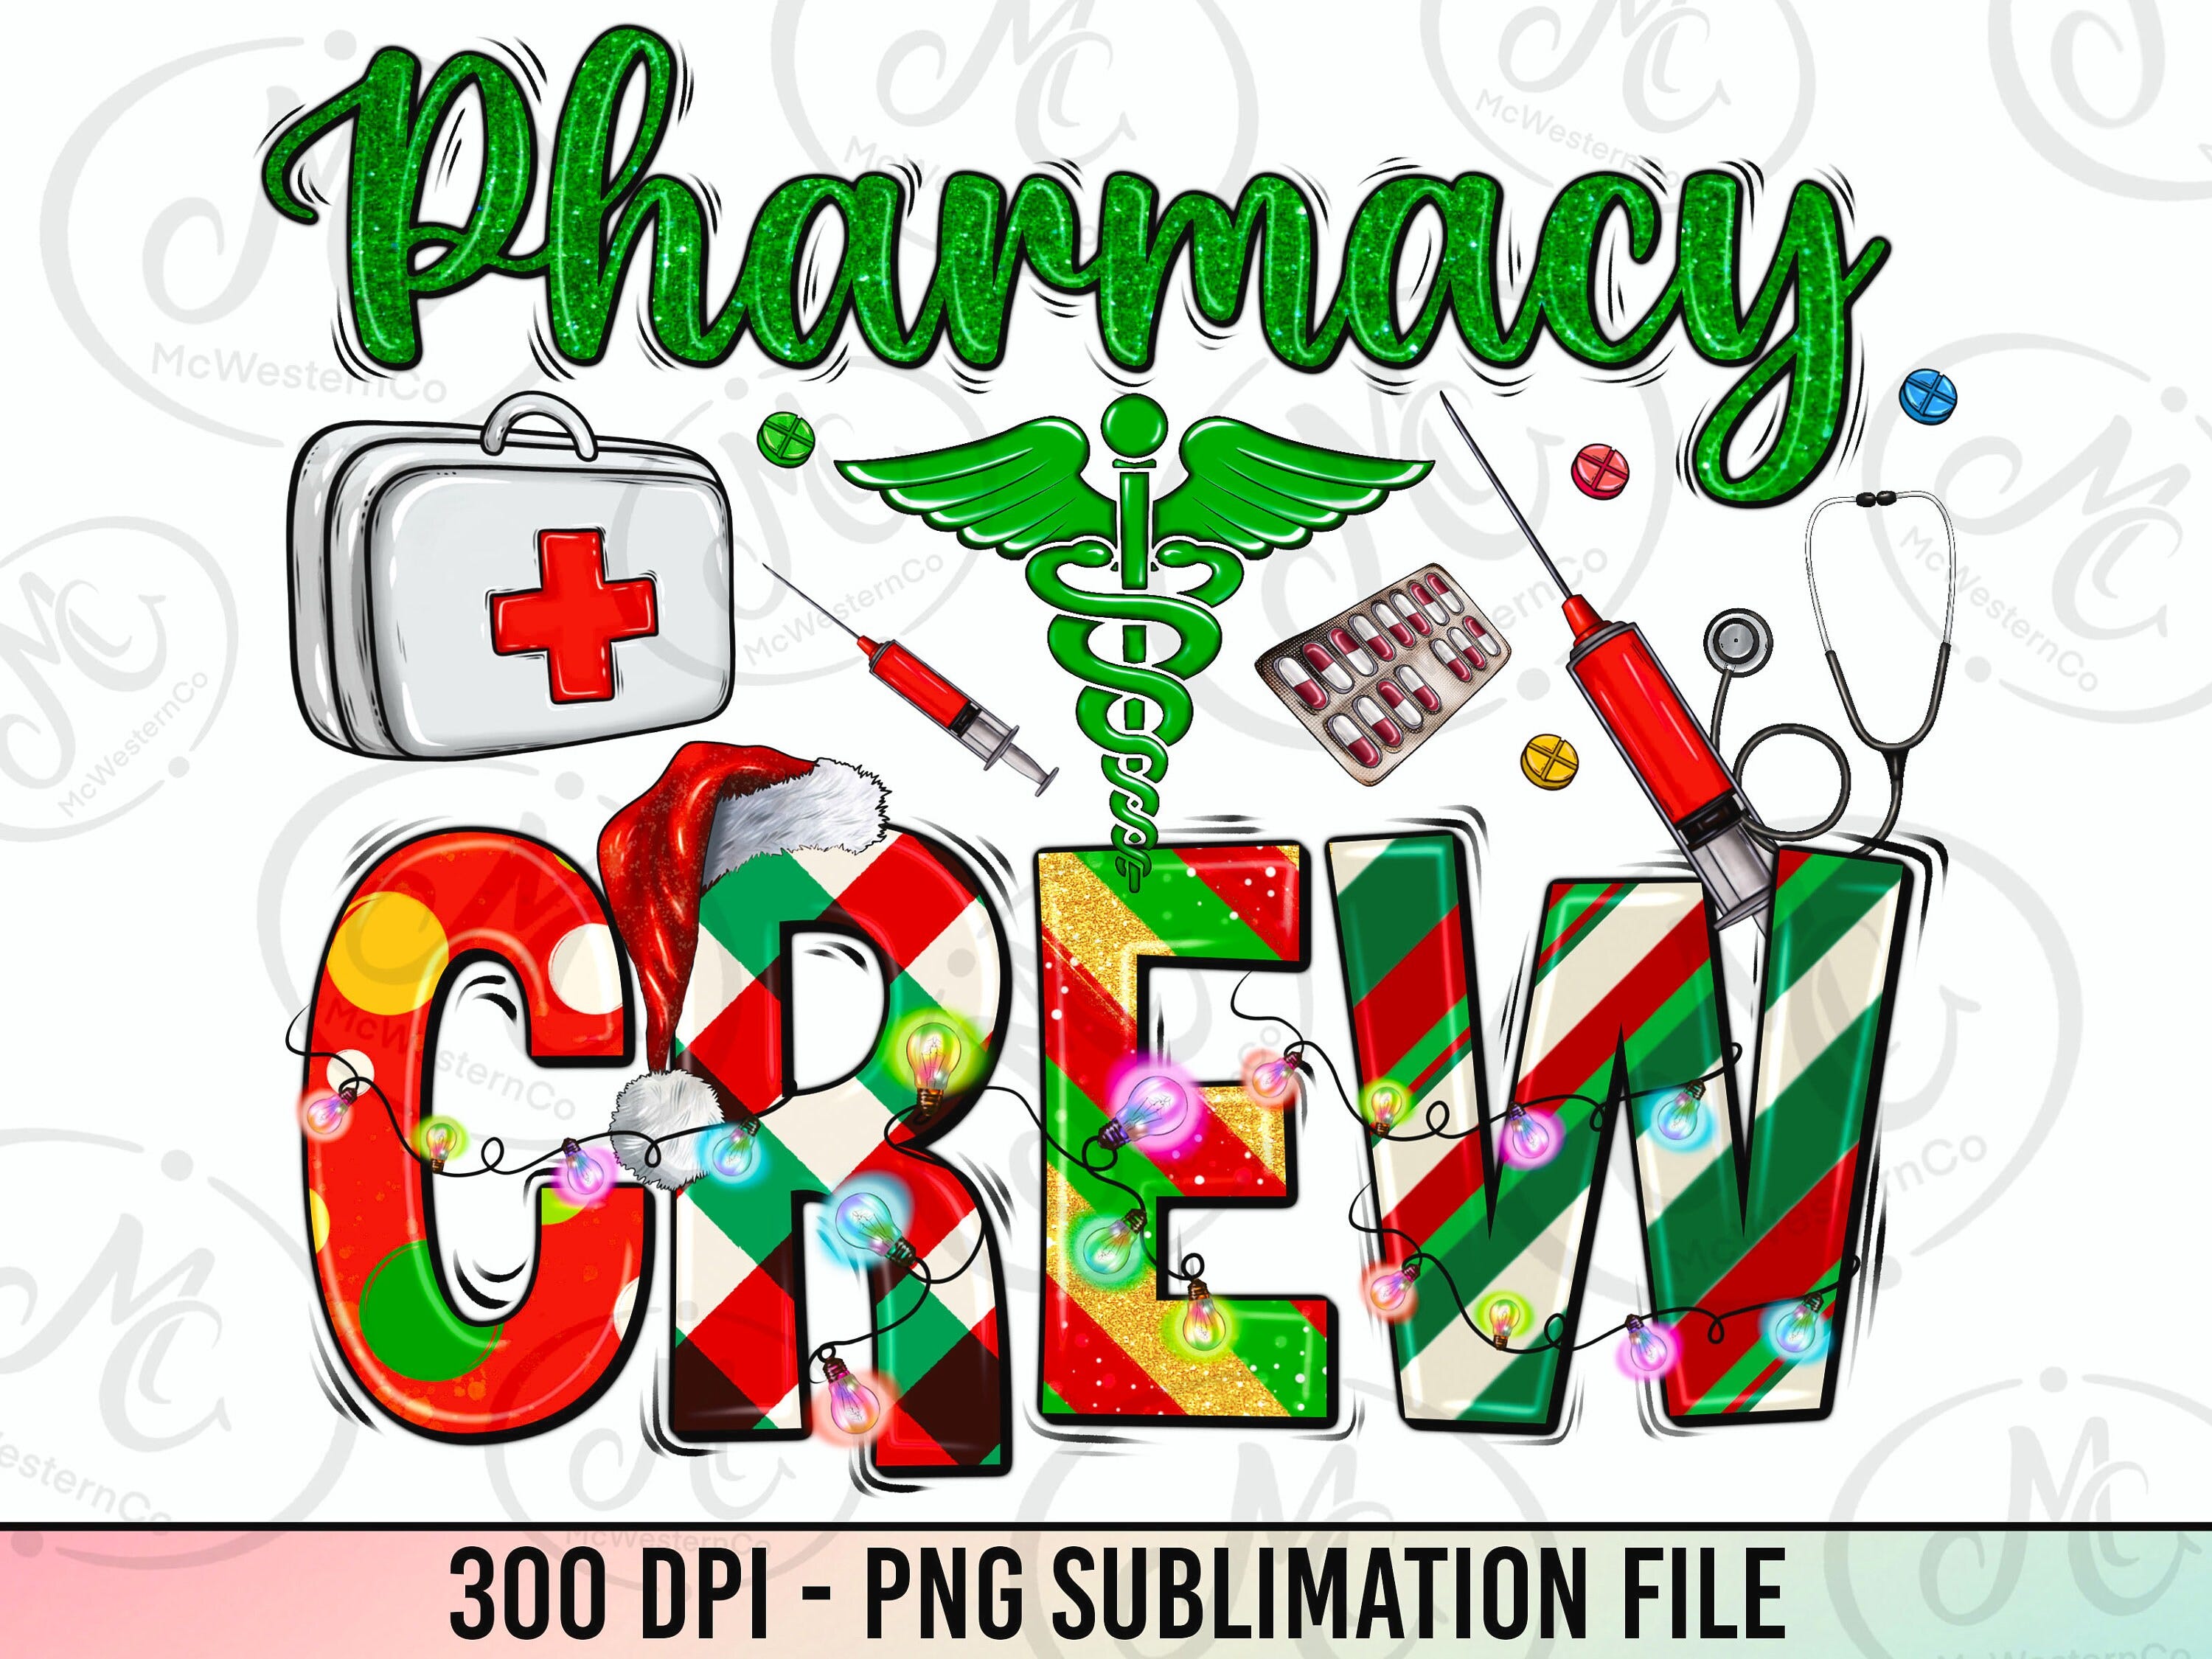 Pharmacy crew Christmas png sublimate design download, Pharmacy crew png, Christmas png, medicine png, sublimate designs download